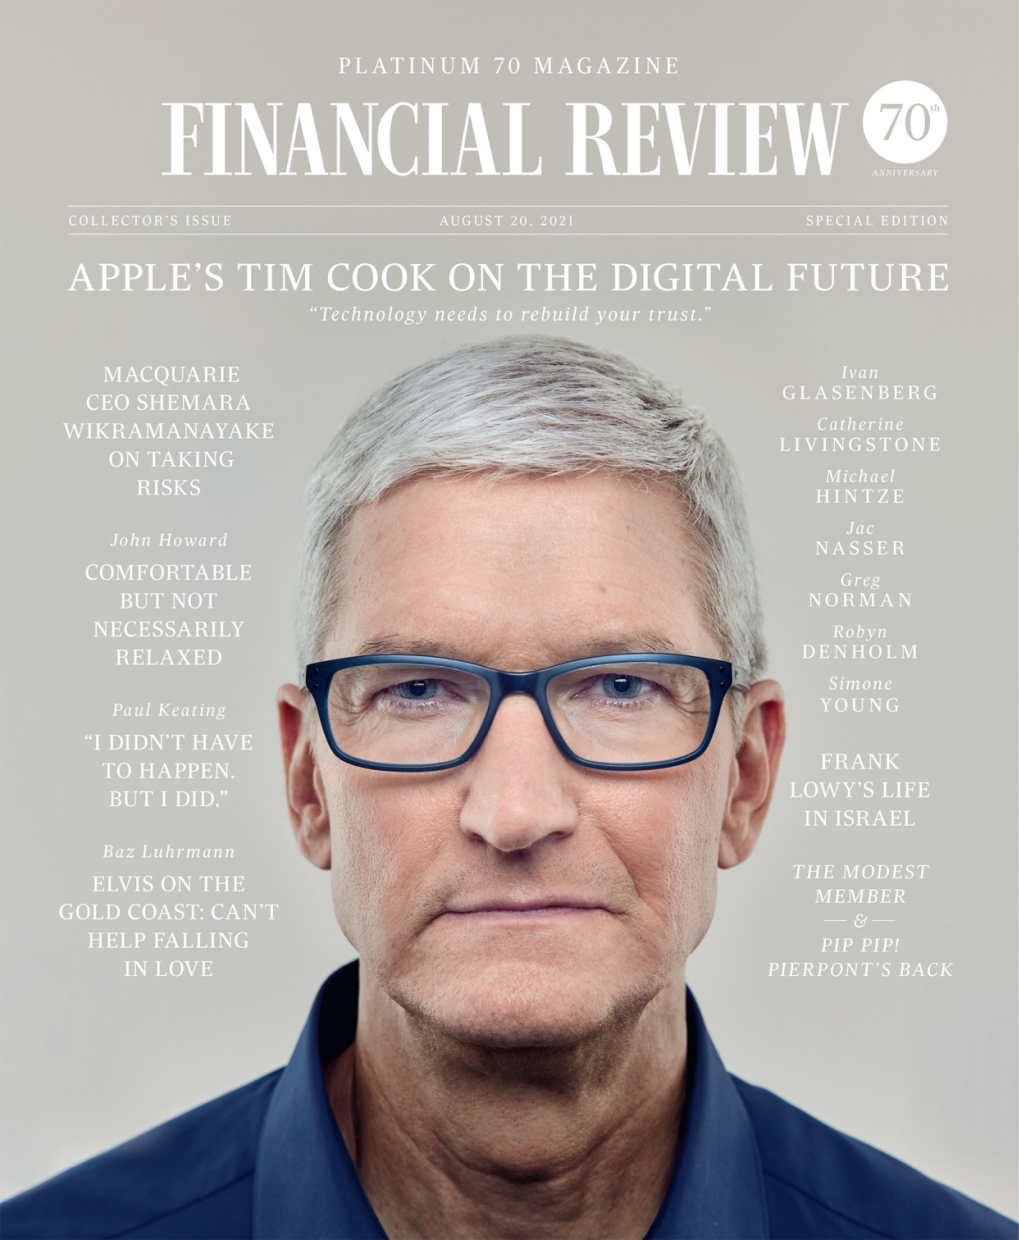 Grooming for Tim Cook